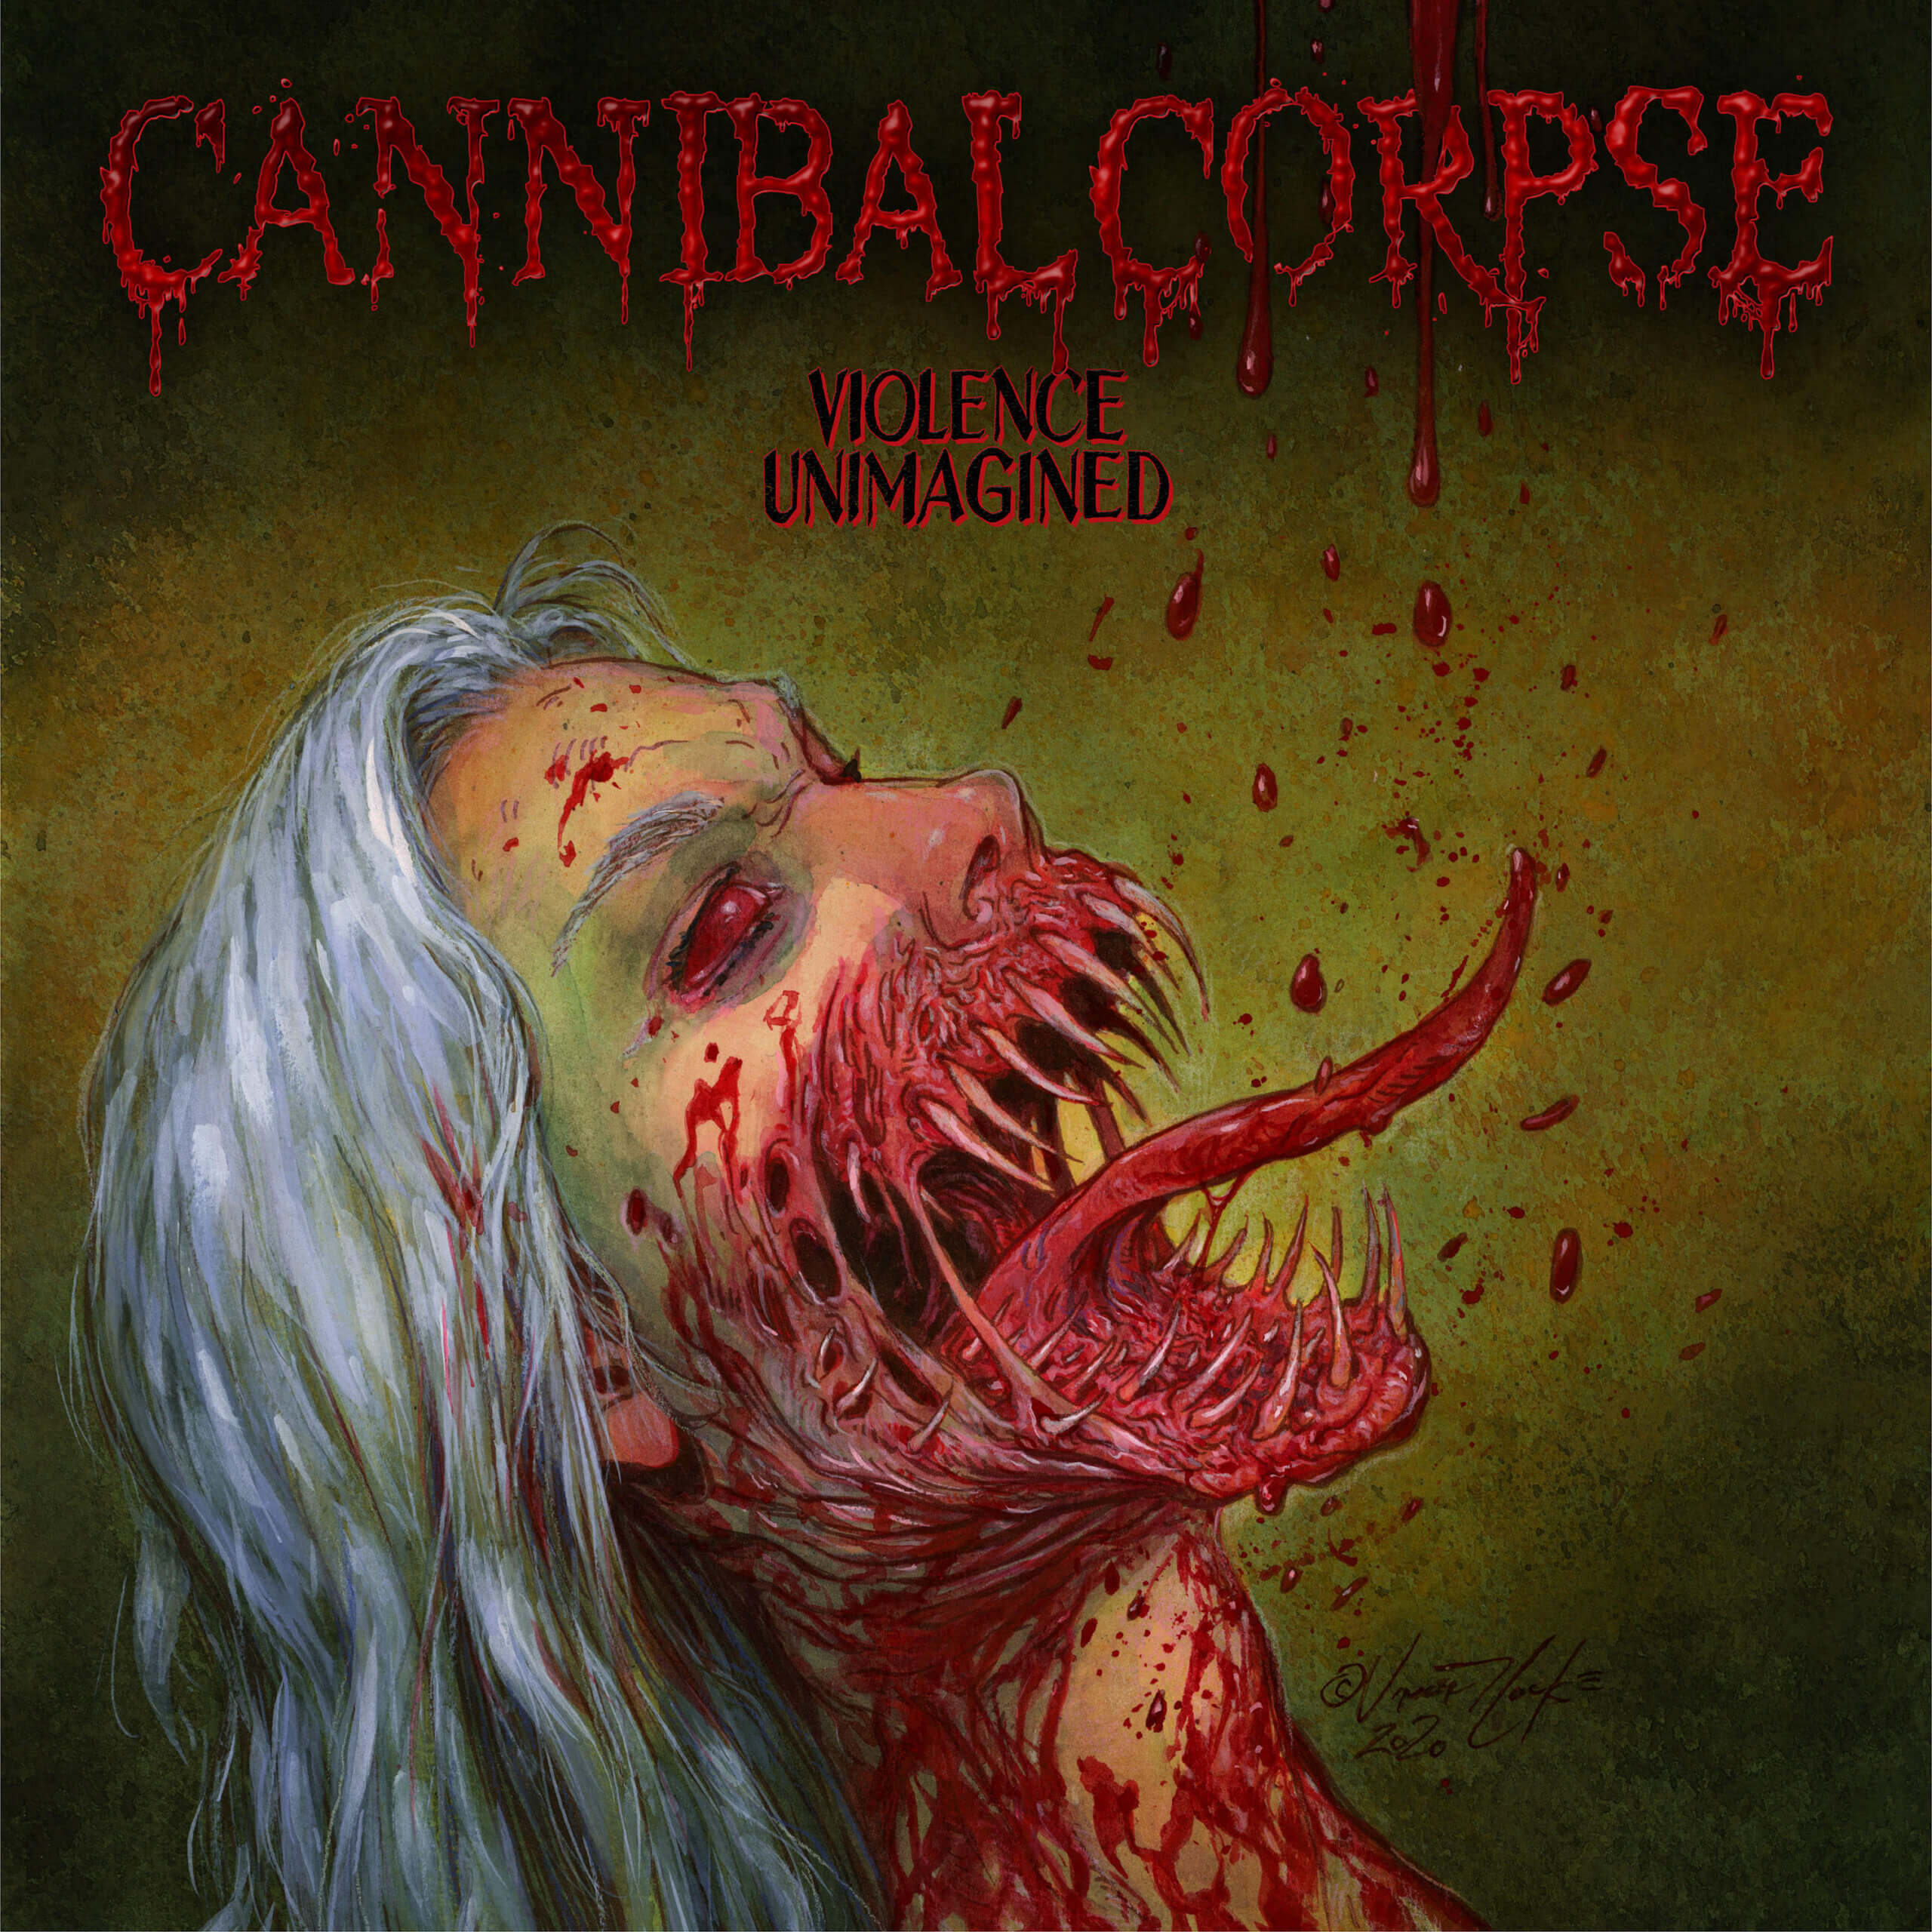 Violence Unimagined by CANNIBAL CORPSE album review by Jahmeel Russell for Northern Transmissions